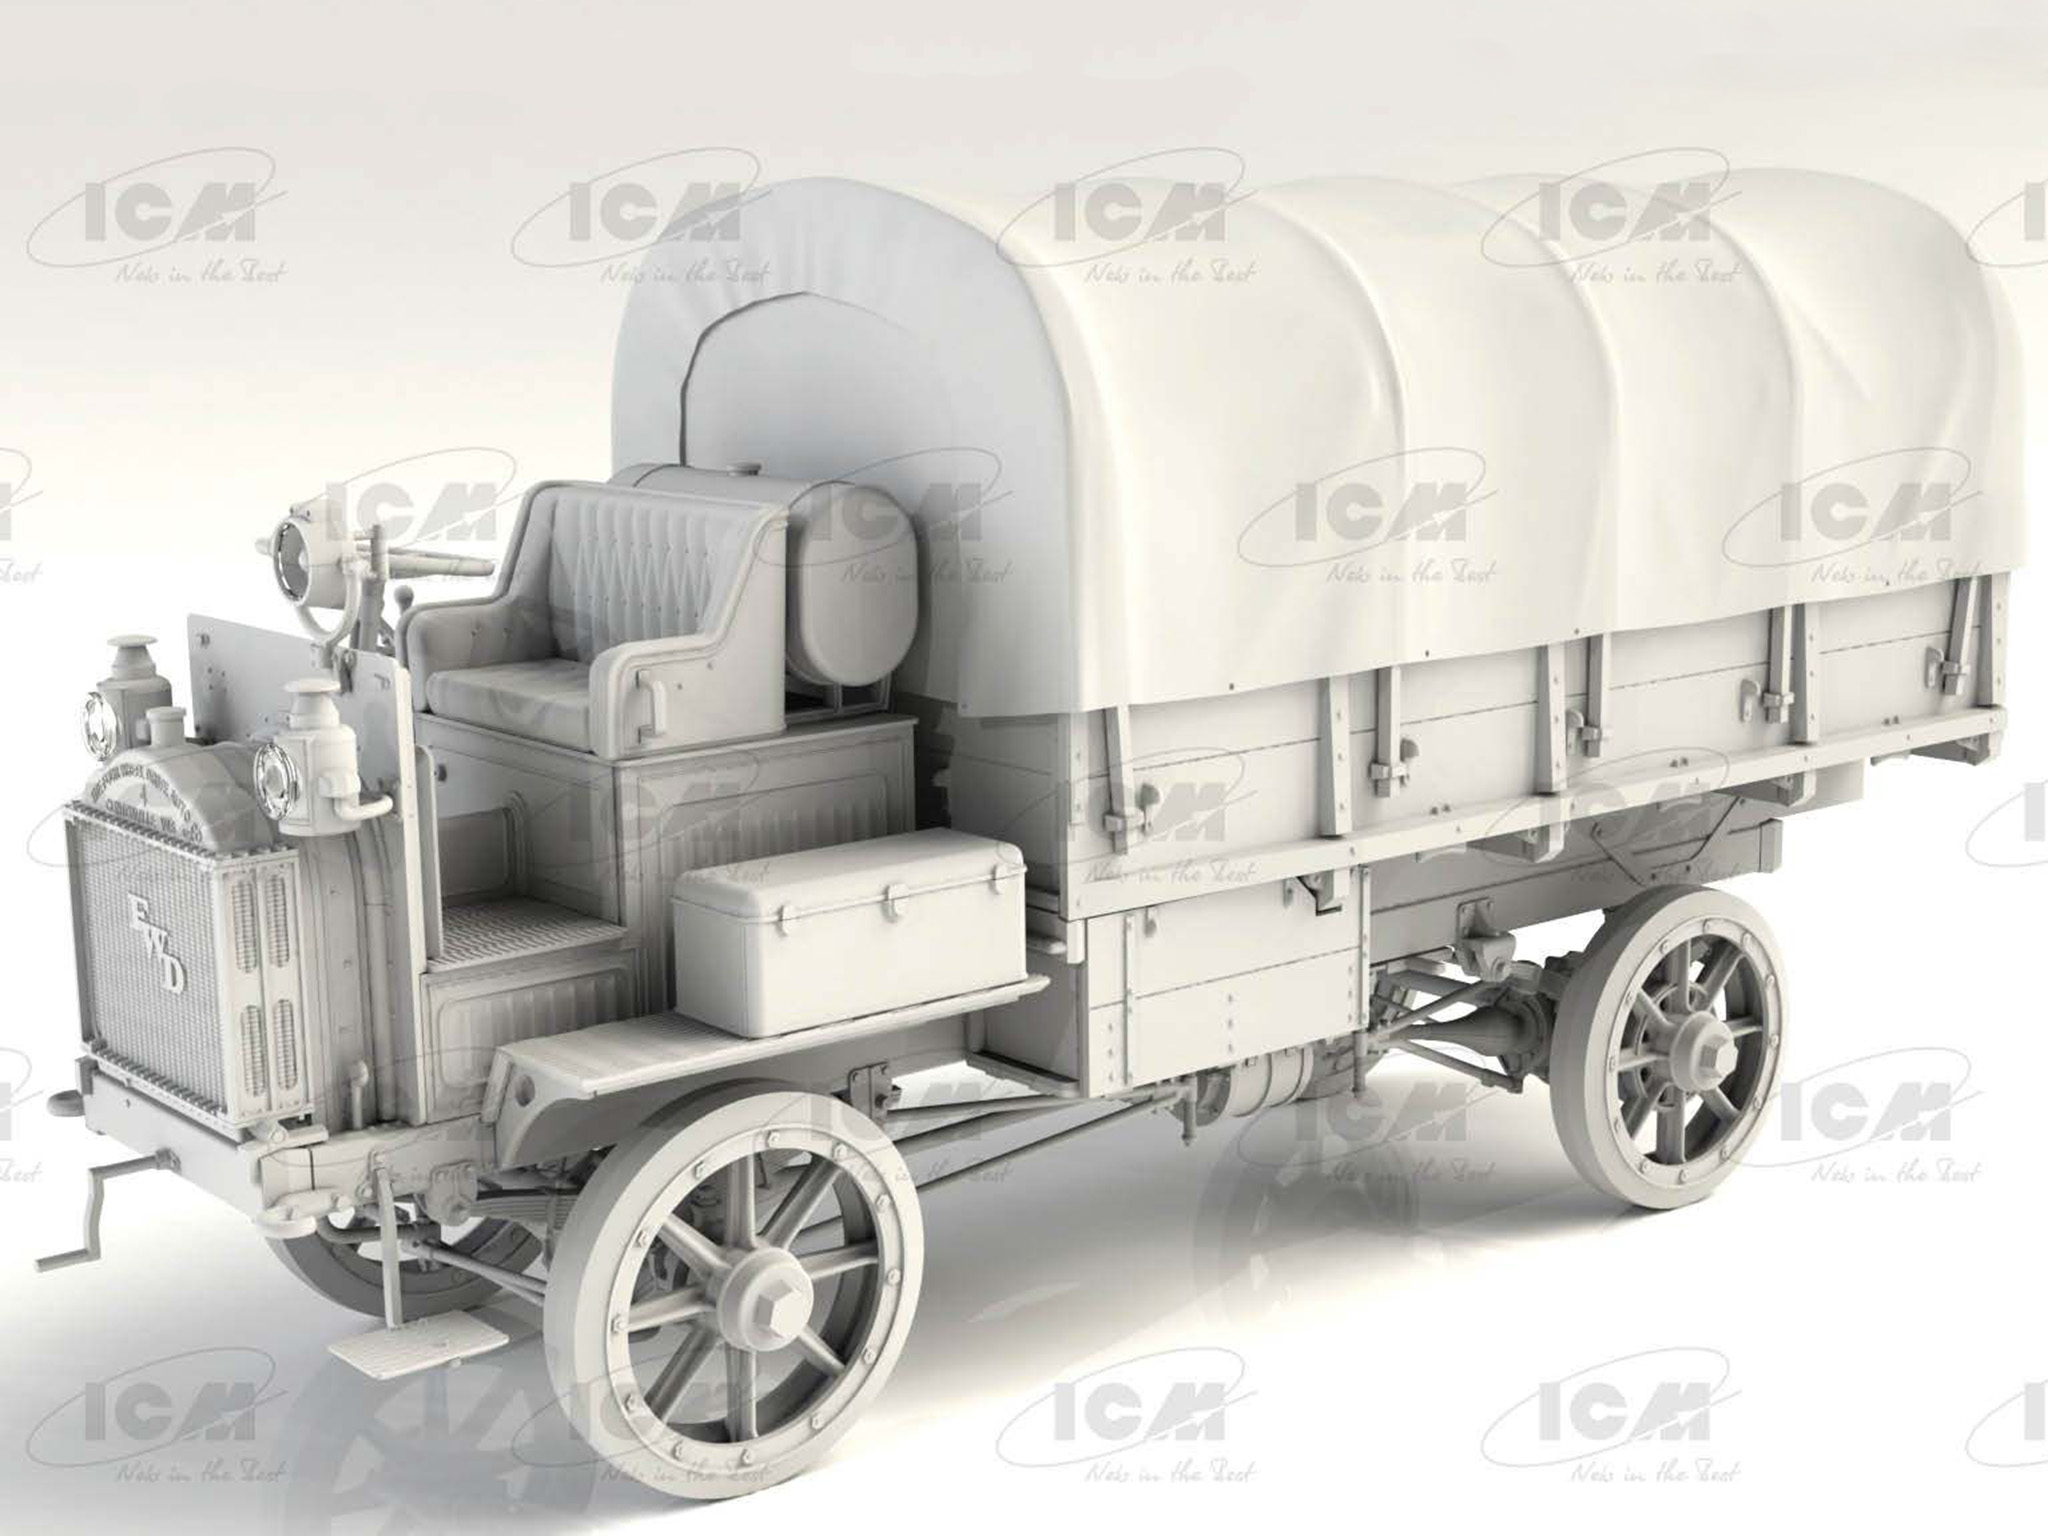 1/35 scale photo-etched ICM Details about   Vmodels 35047 Detail set FWD Type B army truck 